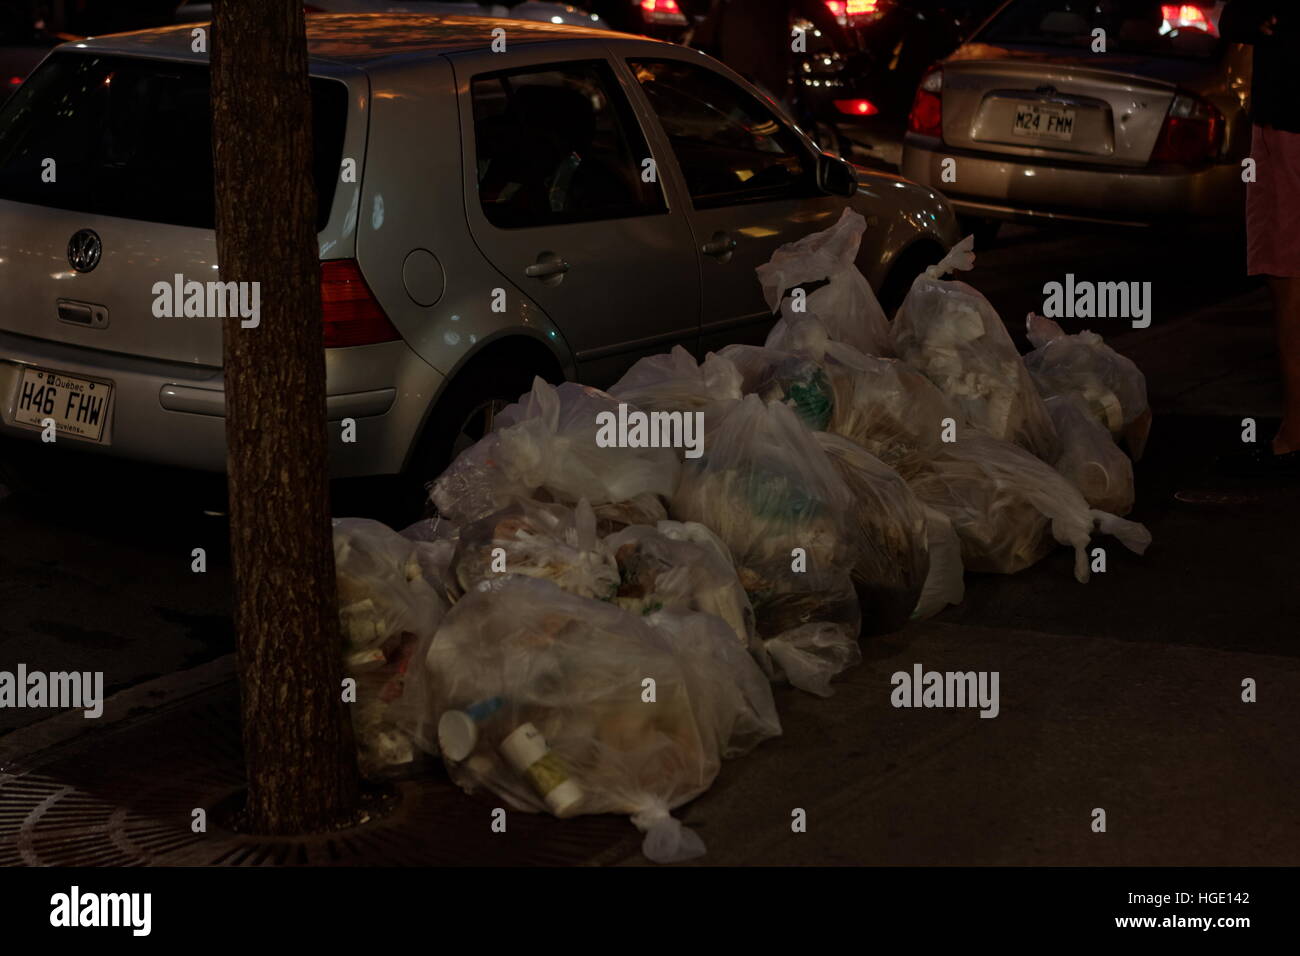 Garbage bags place on the edge of a city sidewalk. Stock Photo